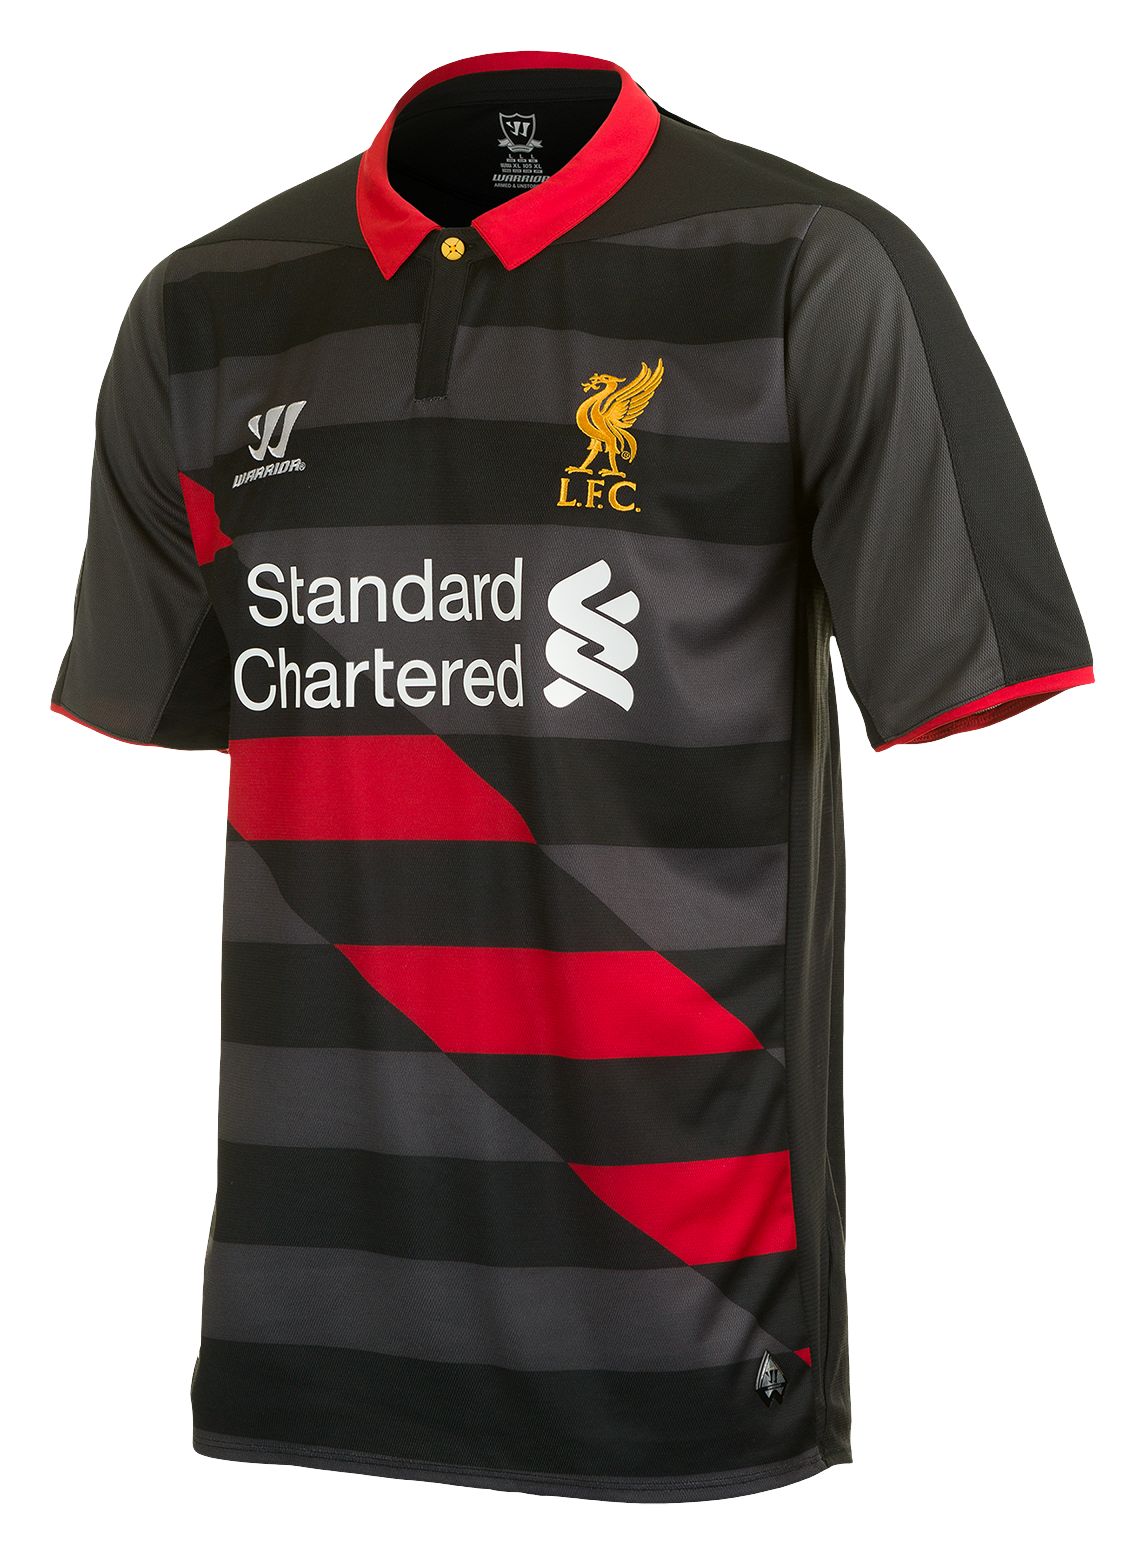 LFC 3rd Short Sleeve Jersey 2014/15, Black with High Risk Red image number 1